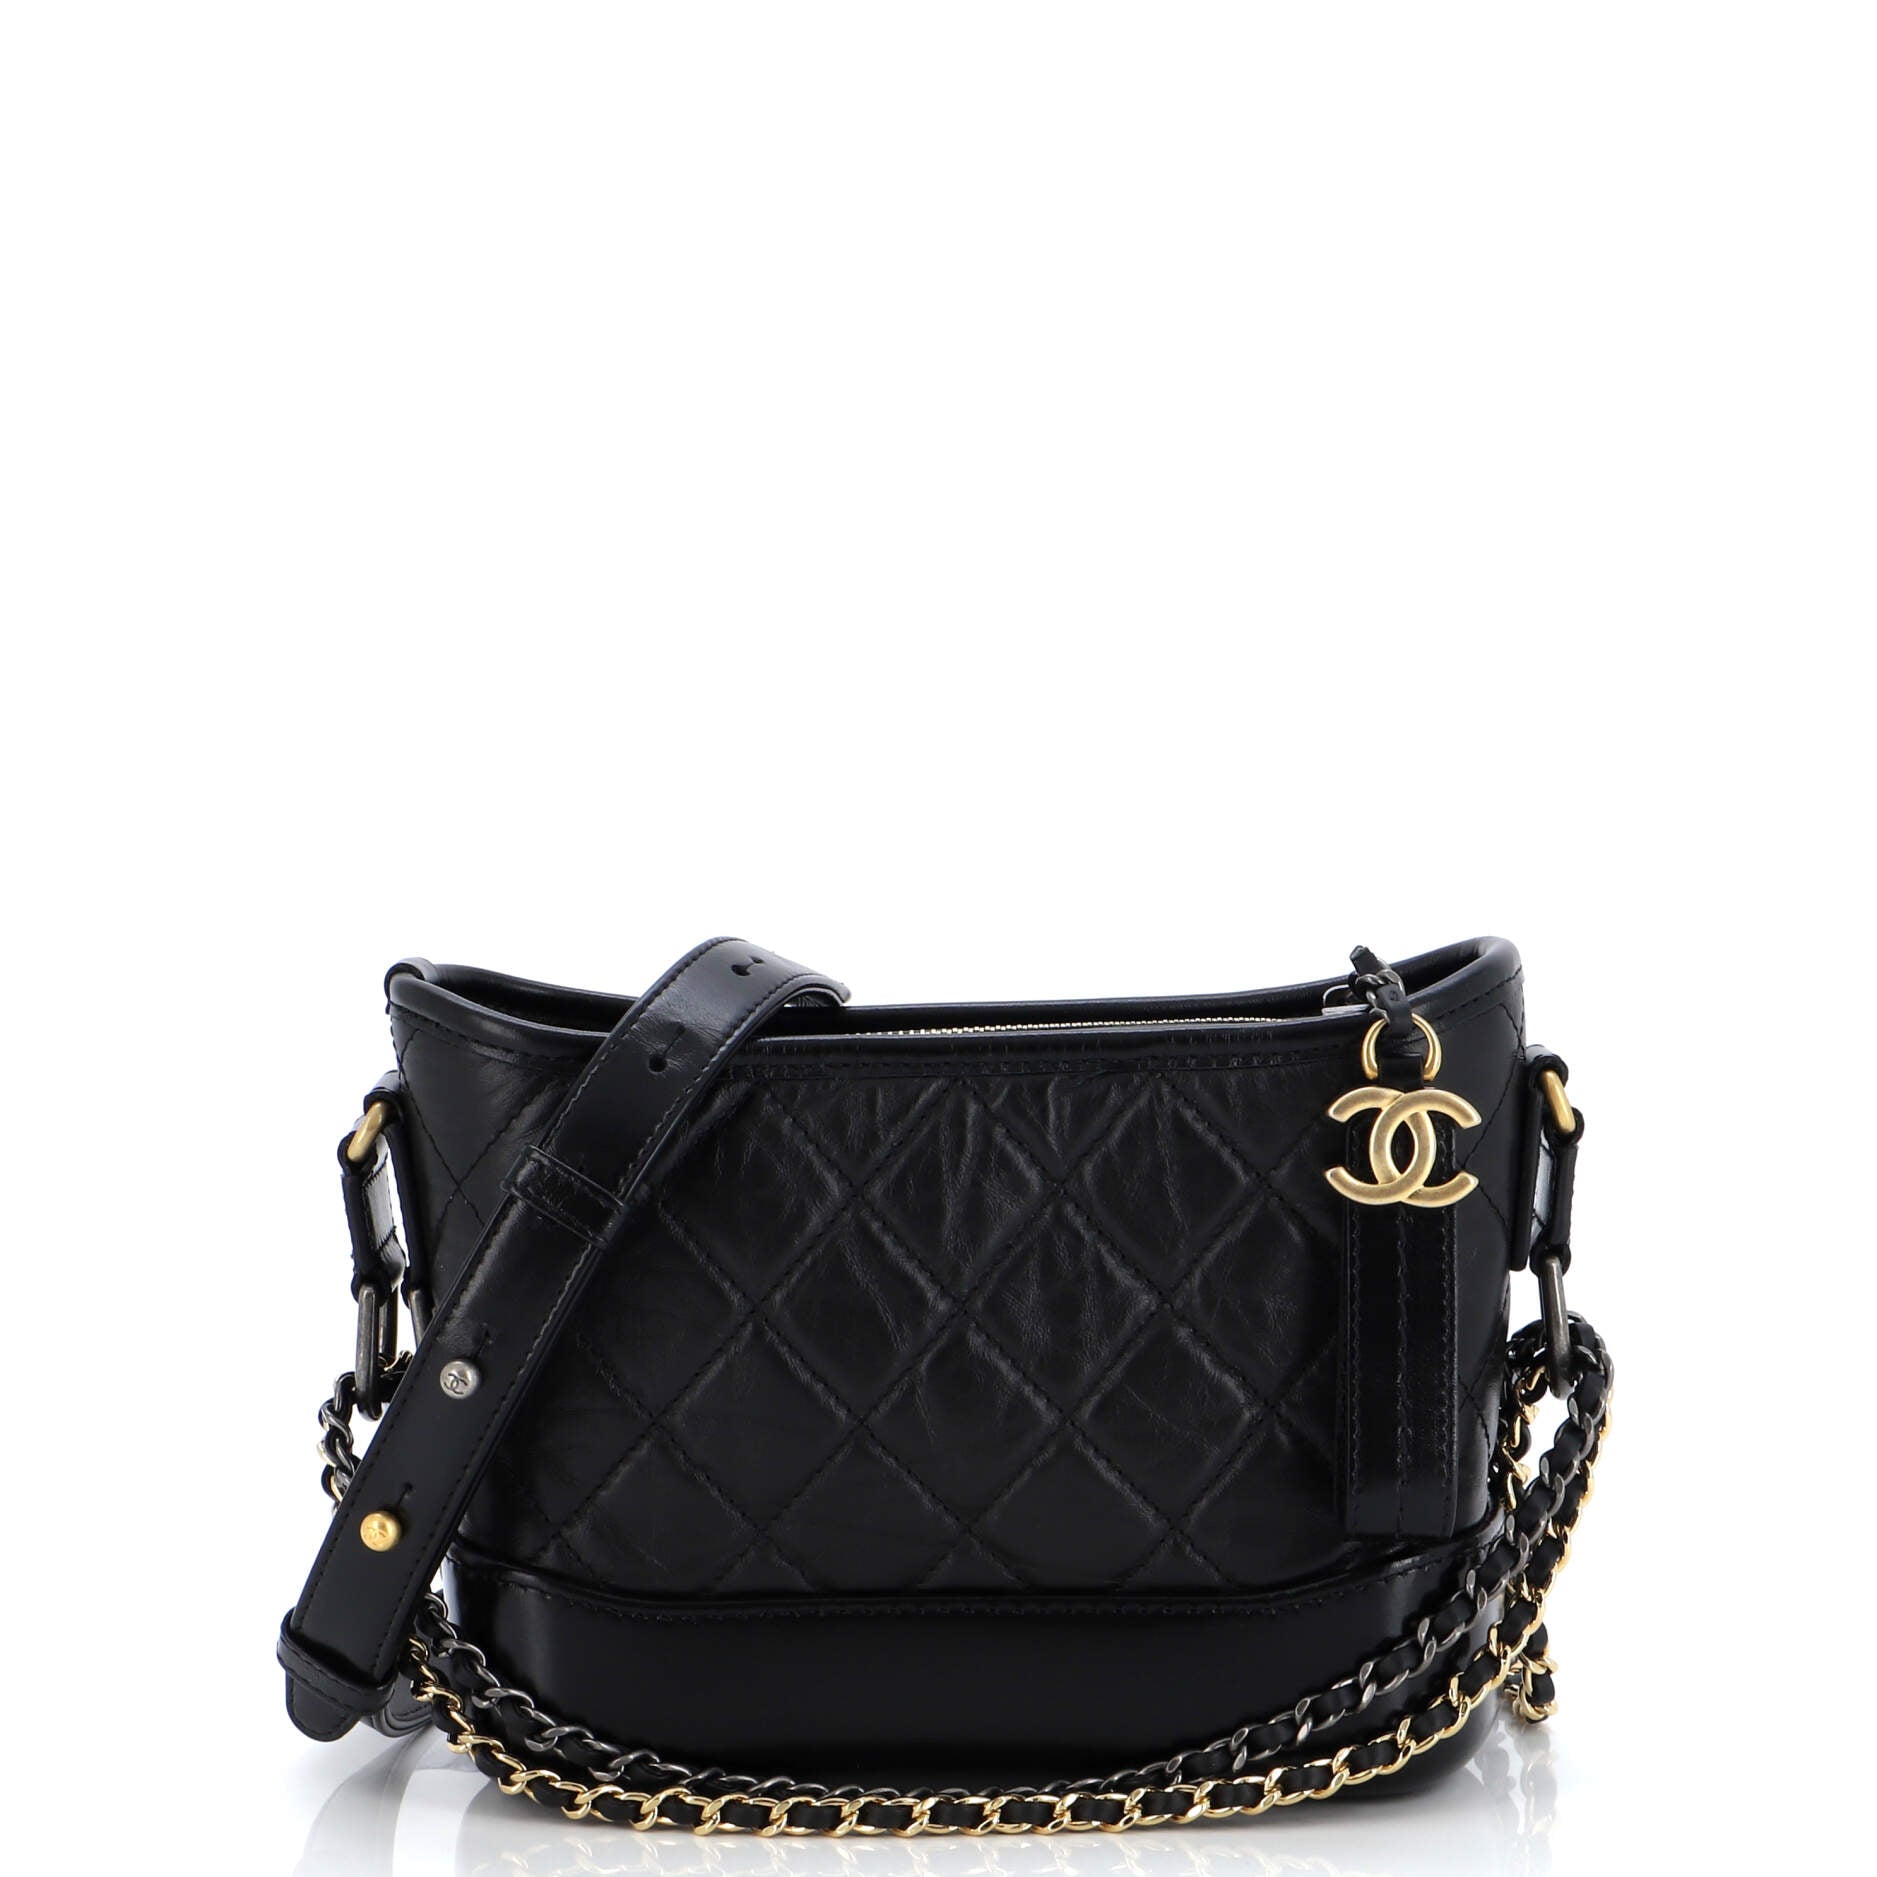 Chanel Black/White Quilted Leather Gabrielle Medium Hobo Bag - Yoogi's  Closet